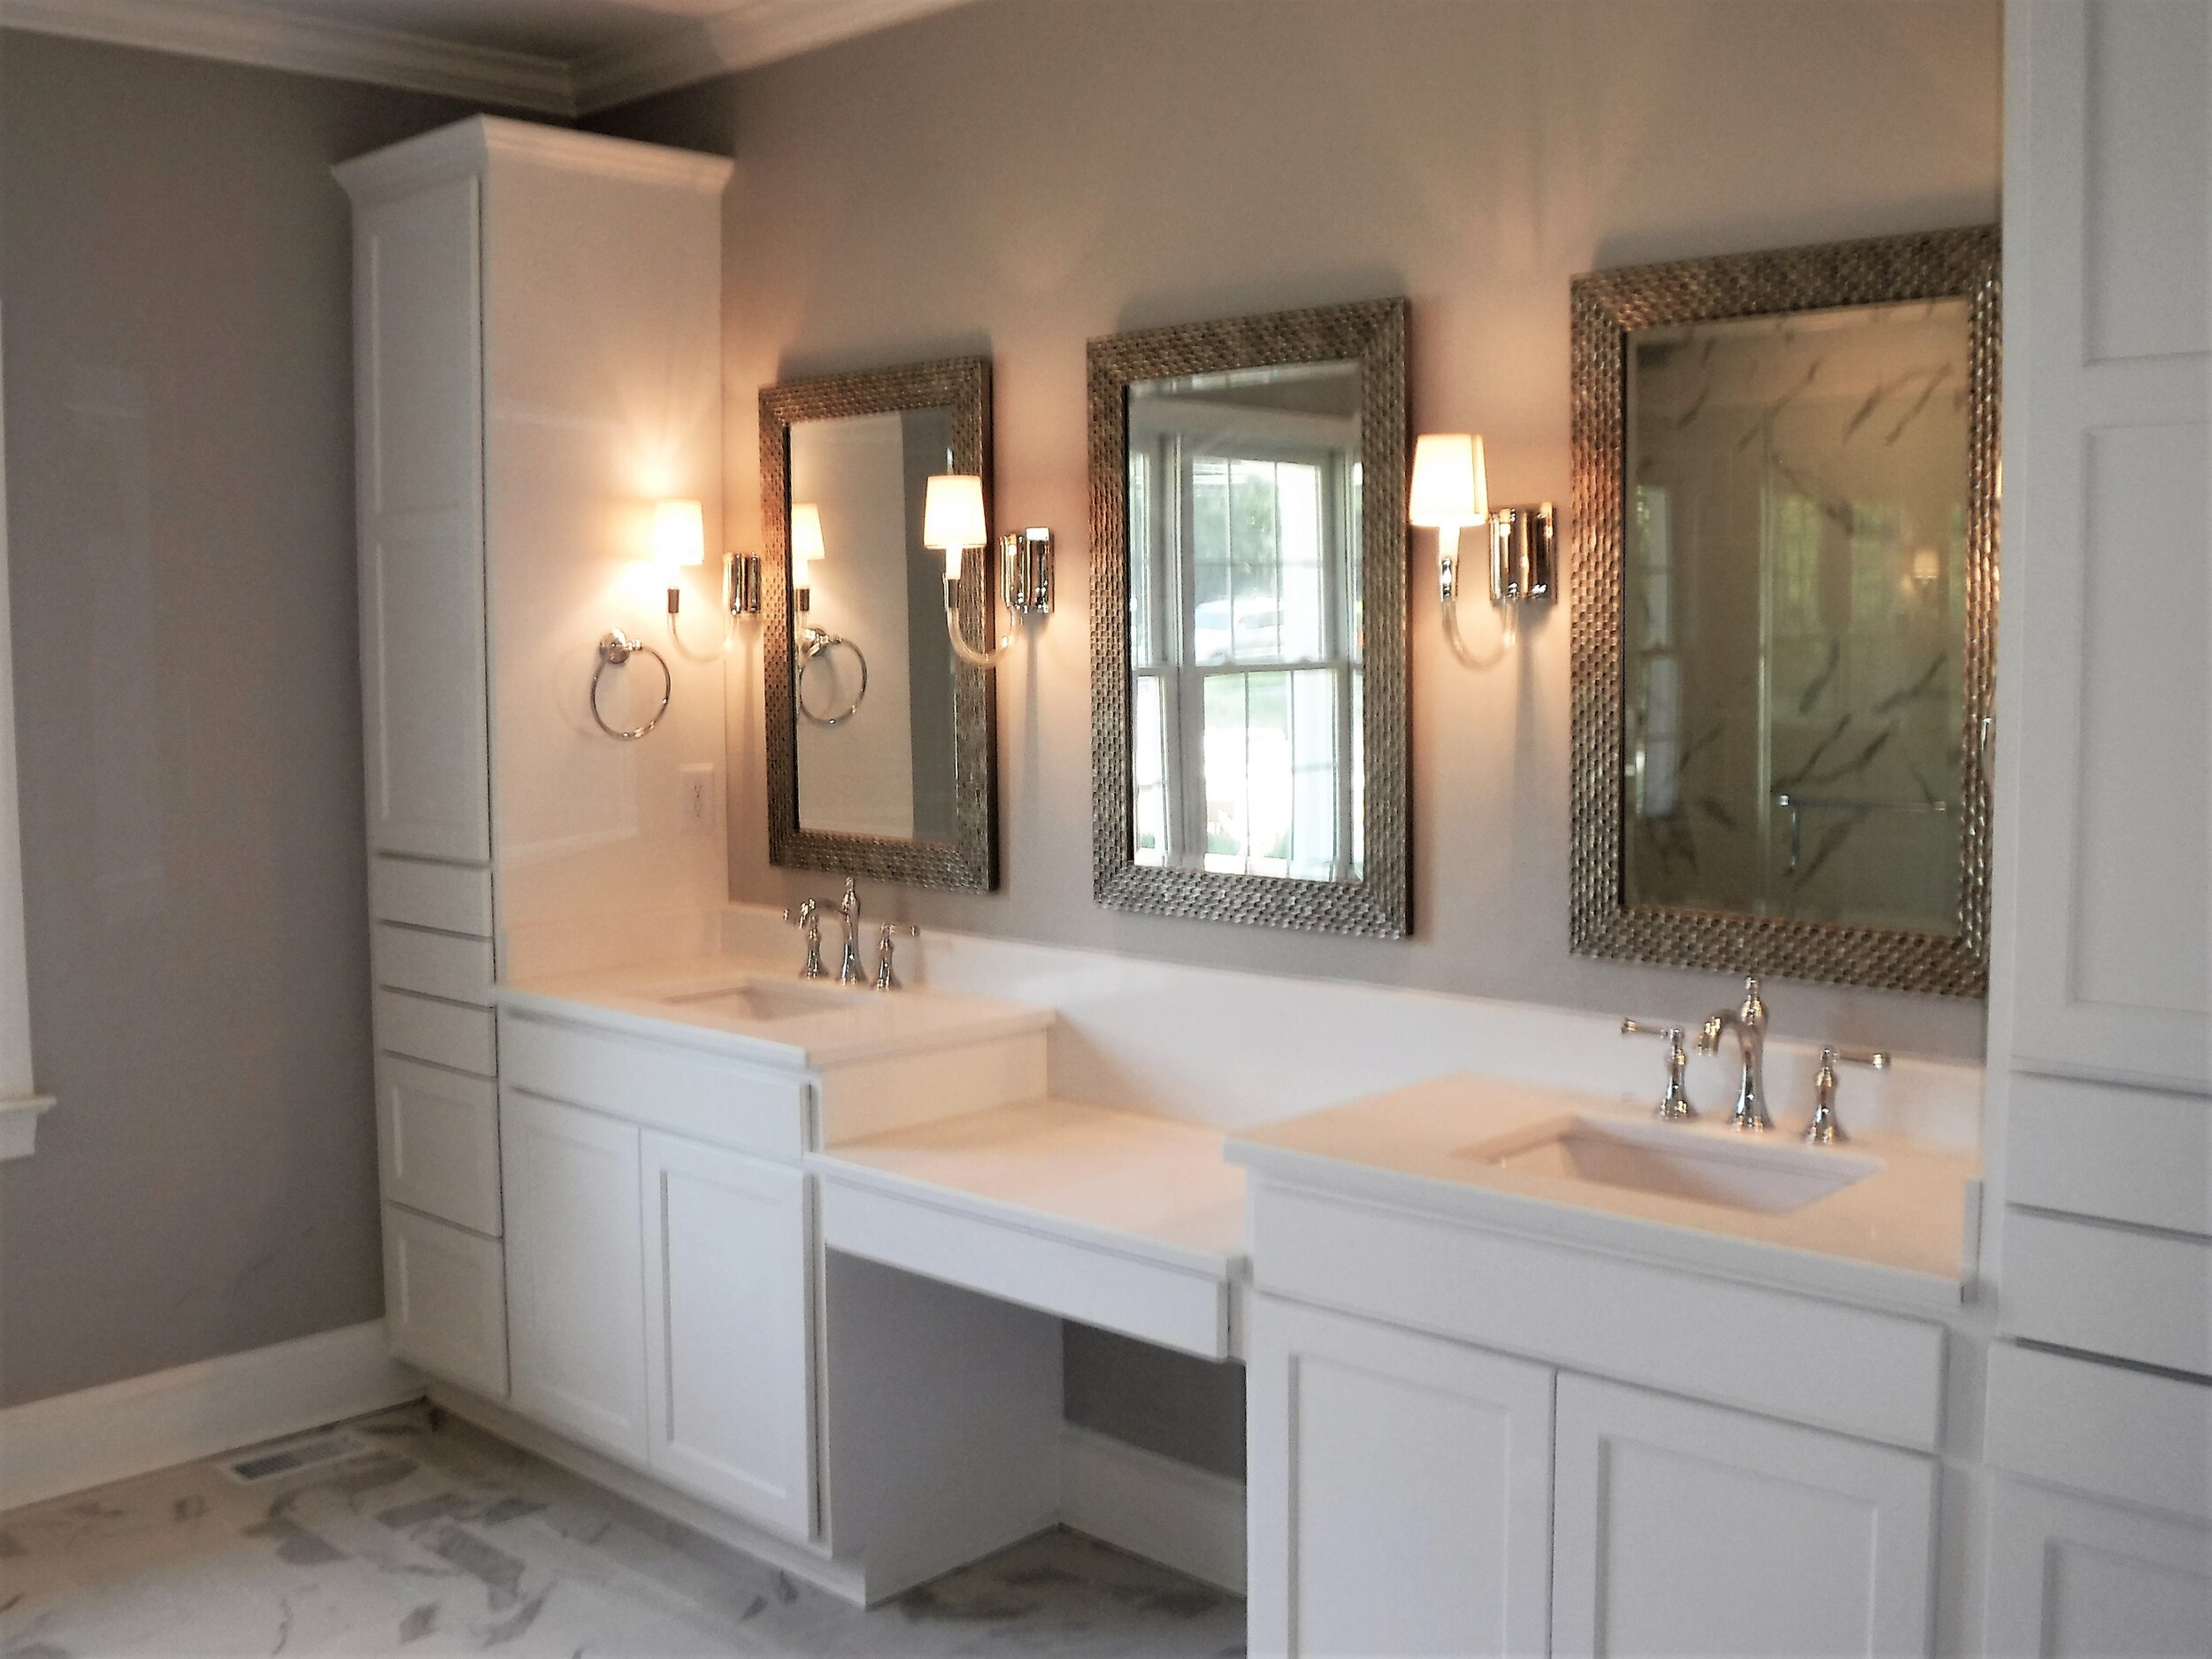 The large master bathroom incorporates and accessible shower, custom built vanity with a dressing table and herringbone tile design